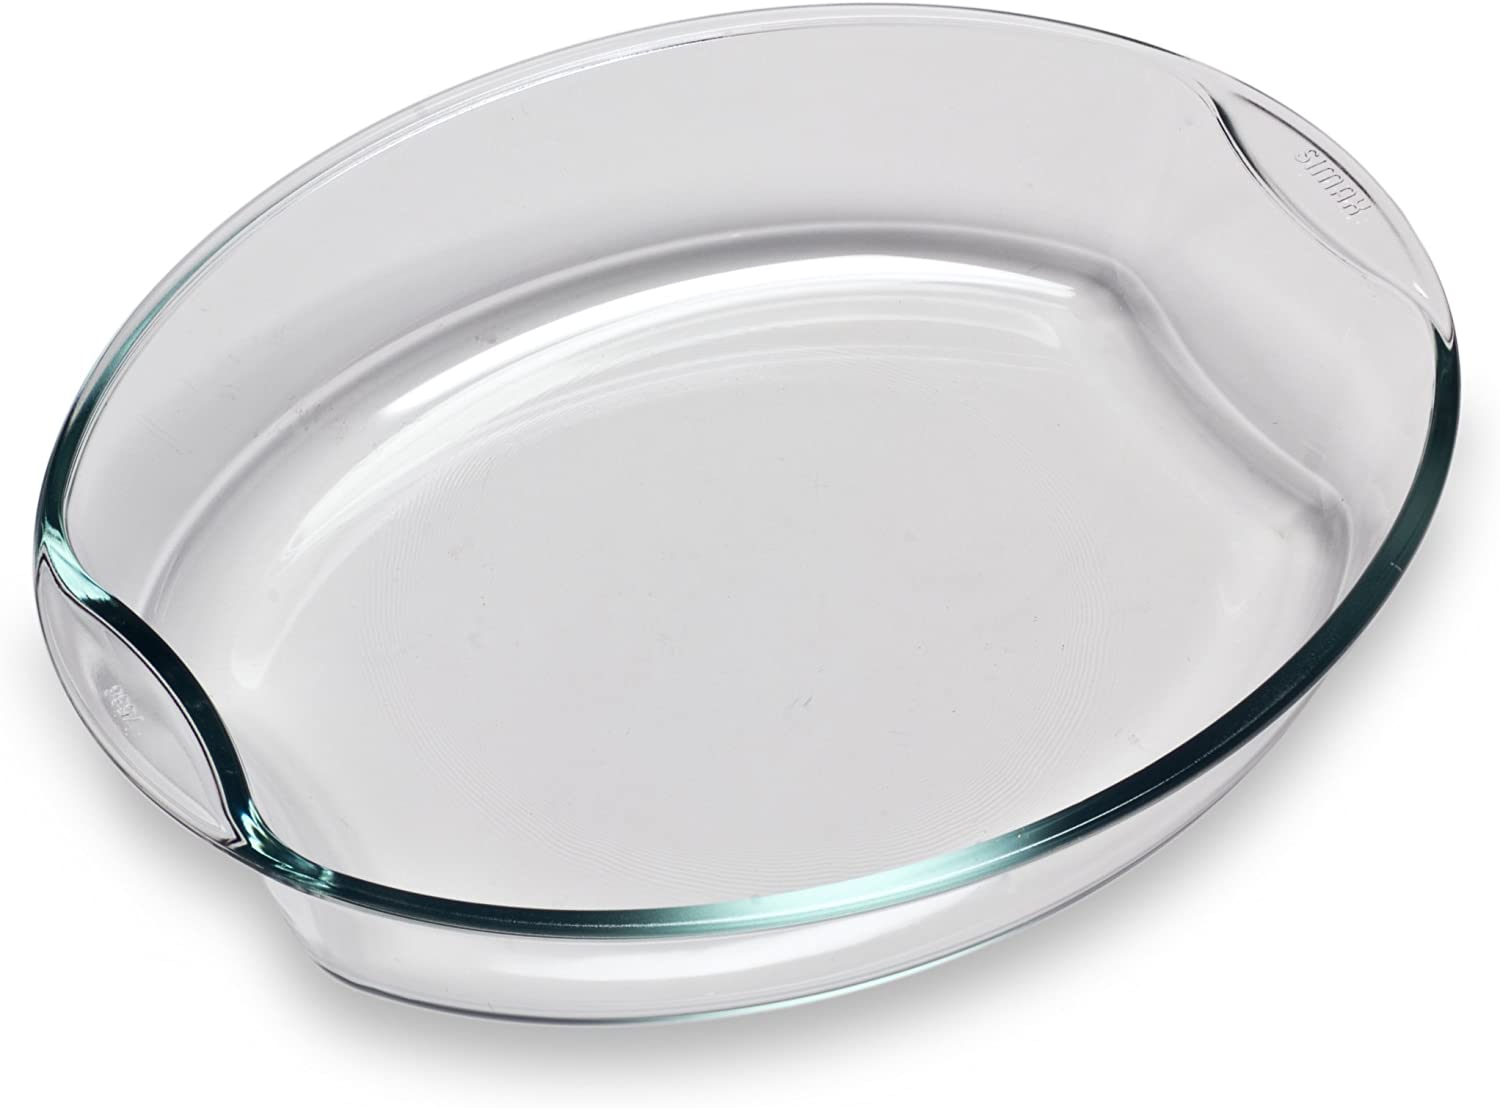 Bohemia Cristal 093 006 093 Frying and Baking Dish 2.5 Litres Oval